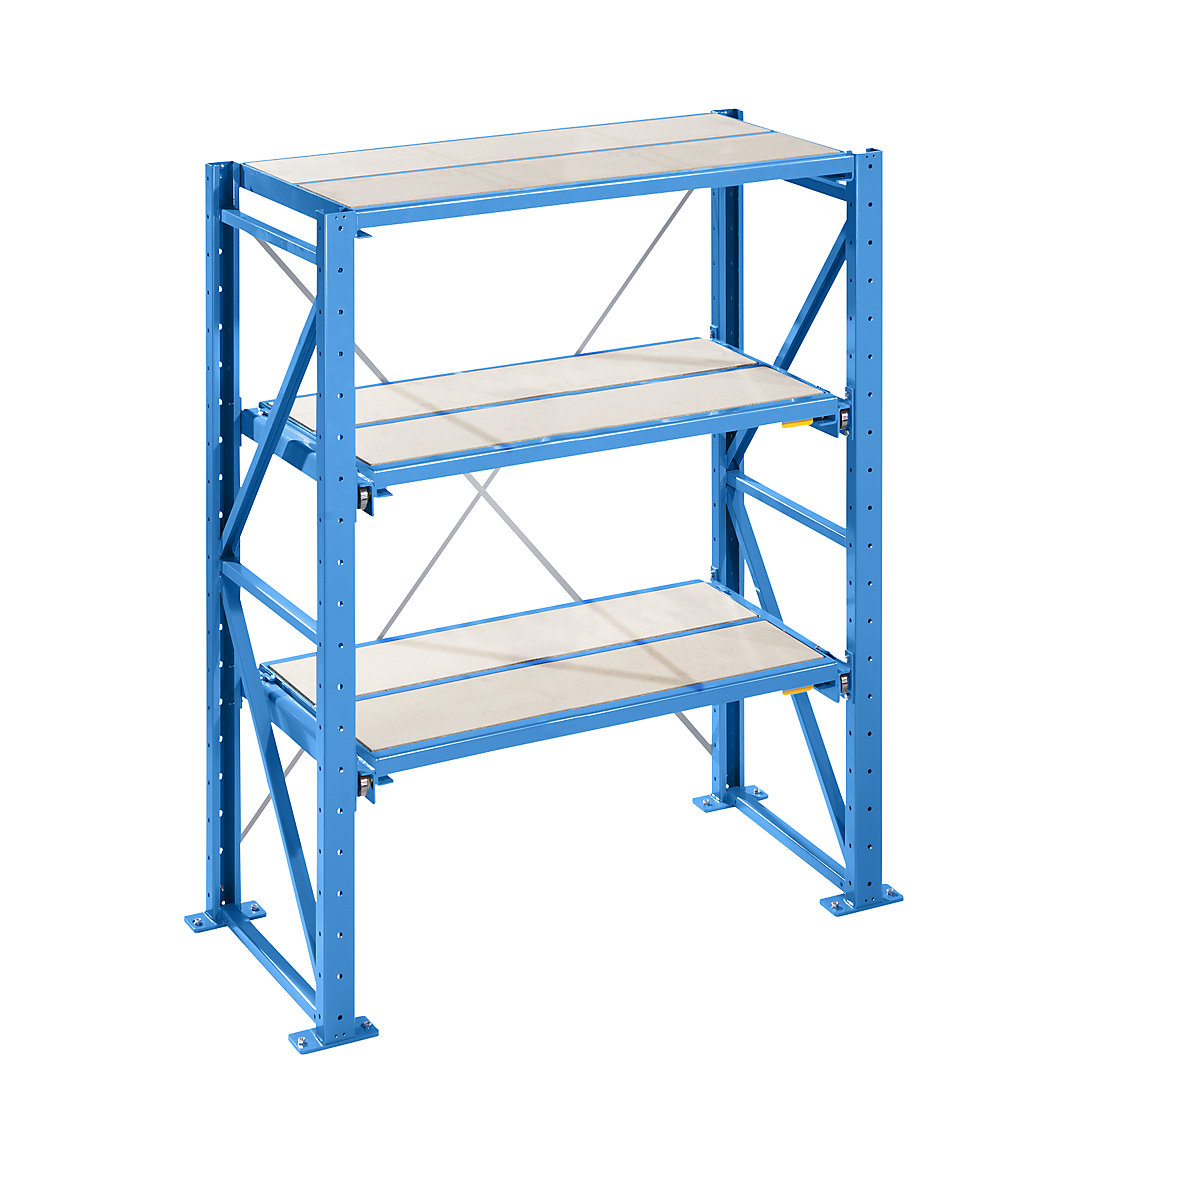 Heavy duty pull-out shelving unit - LISTA